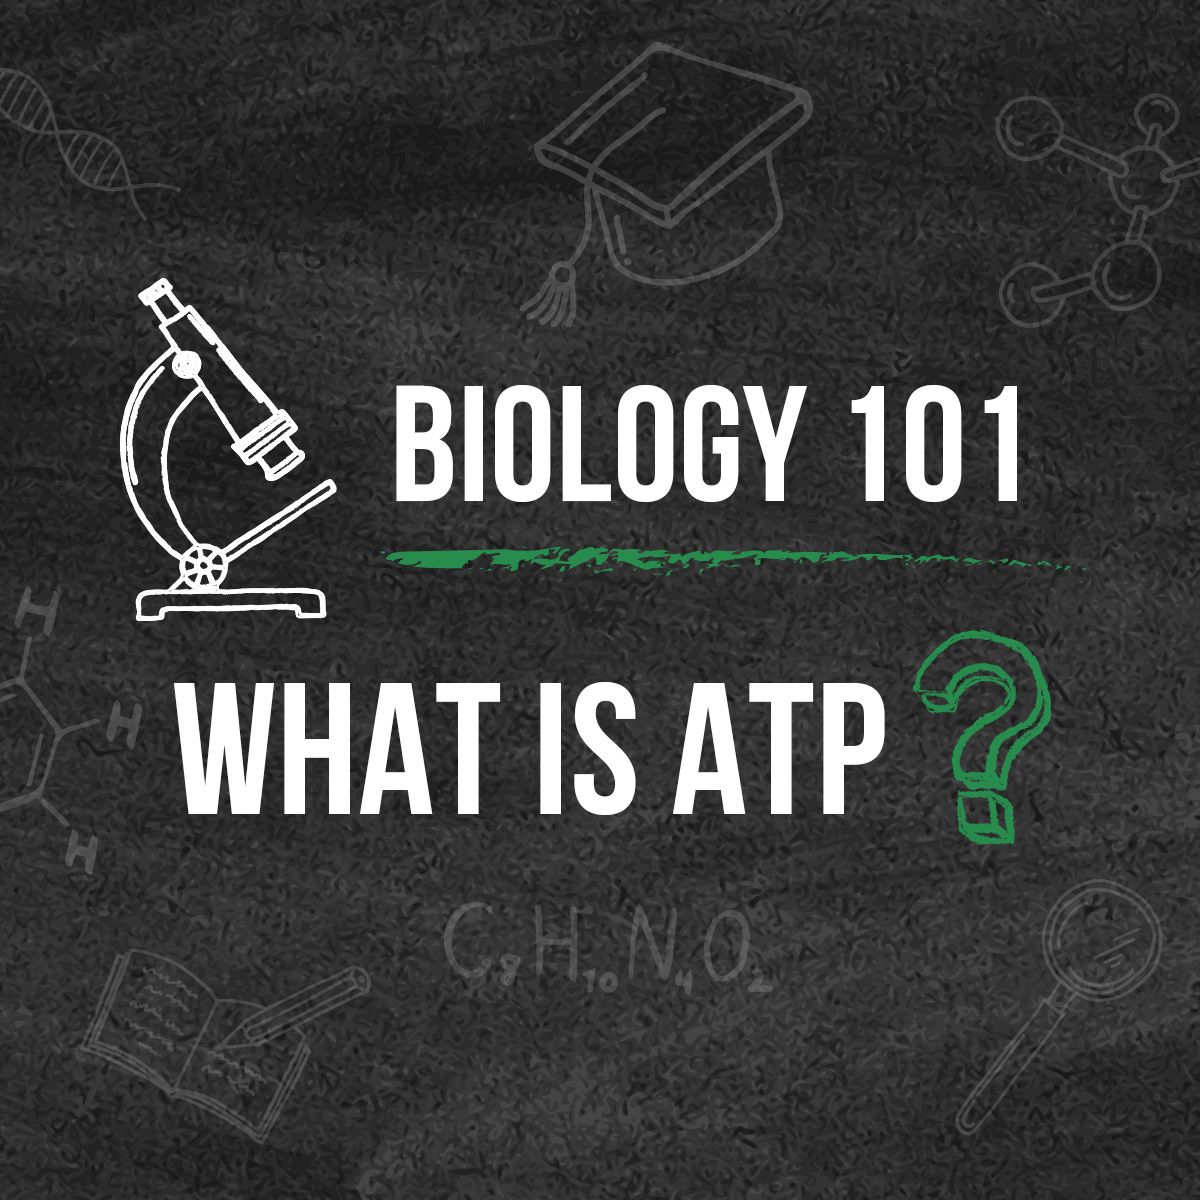 Biology 101 What is ATP?